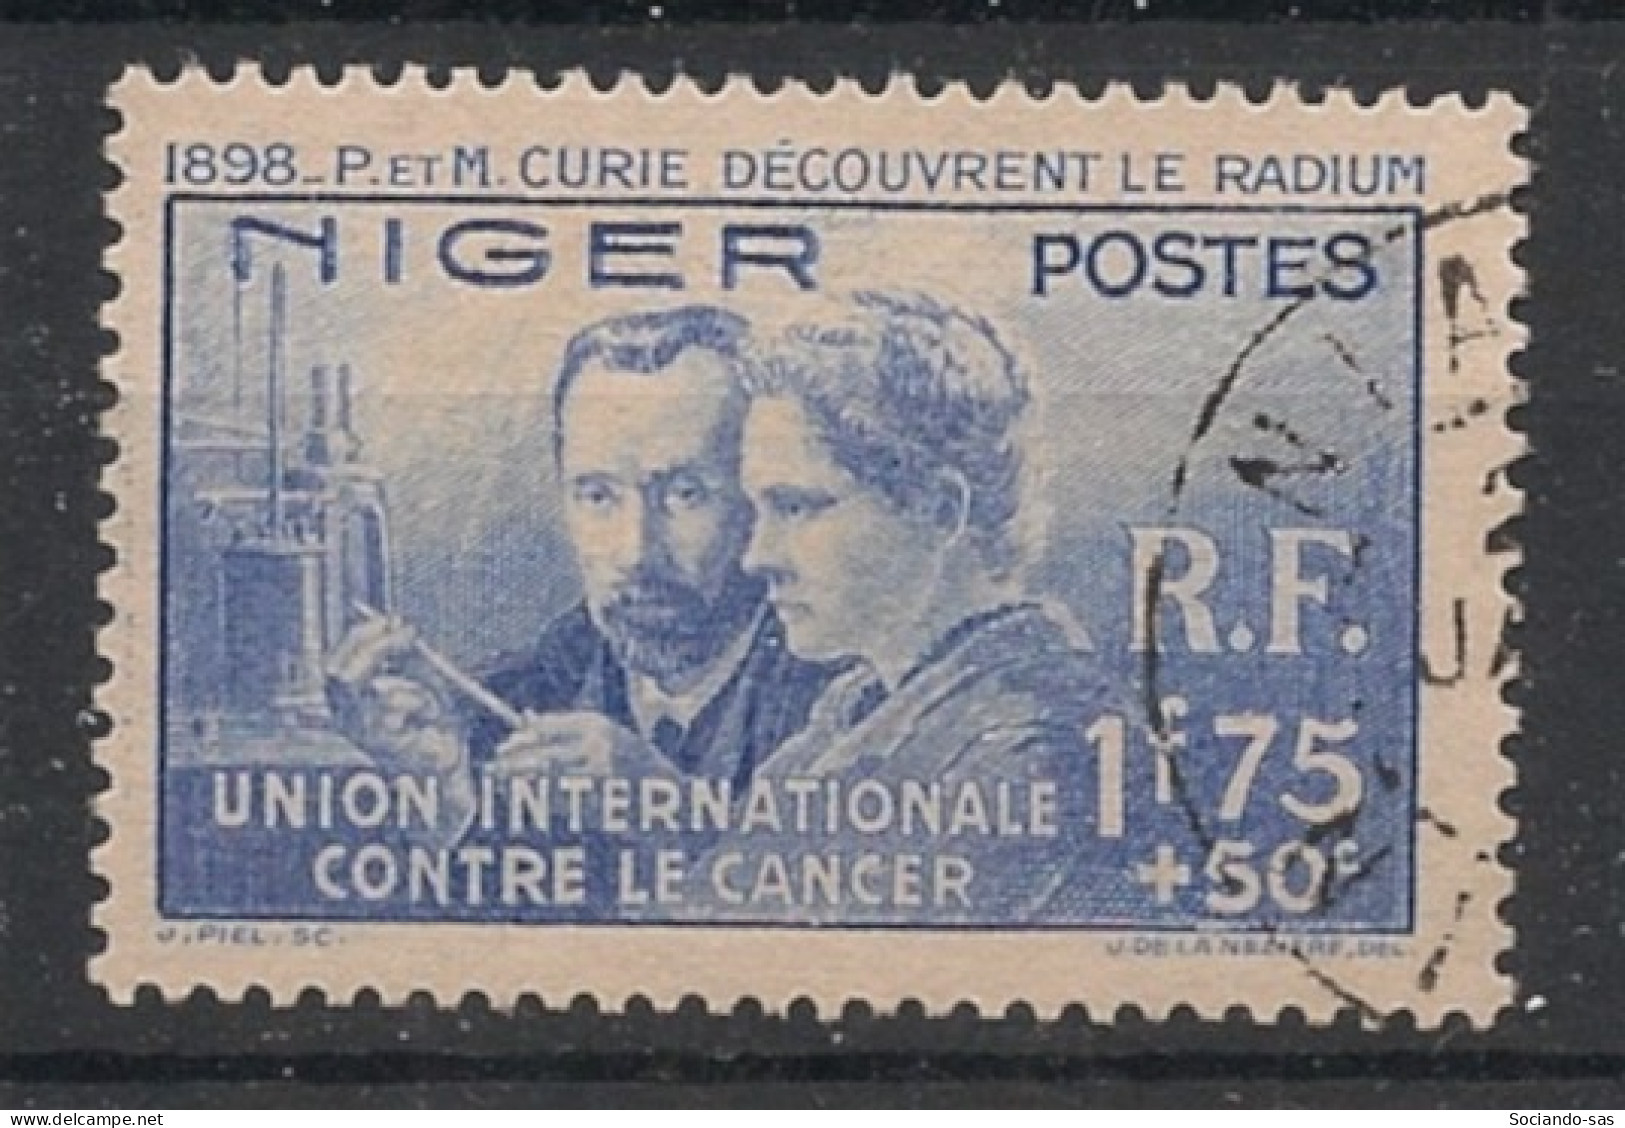 NIGER - 1938 - N°YT. 63 - Marie Curie - Oblitéré / Used - Usati